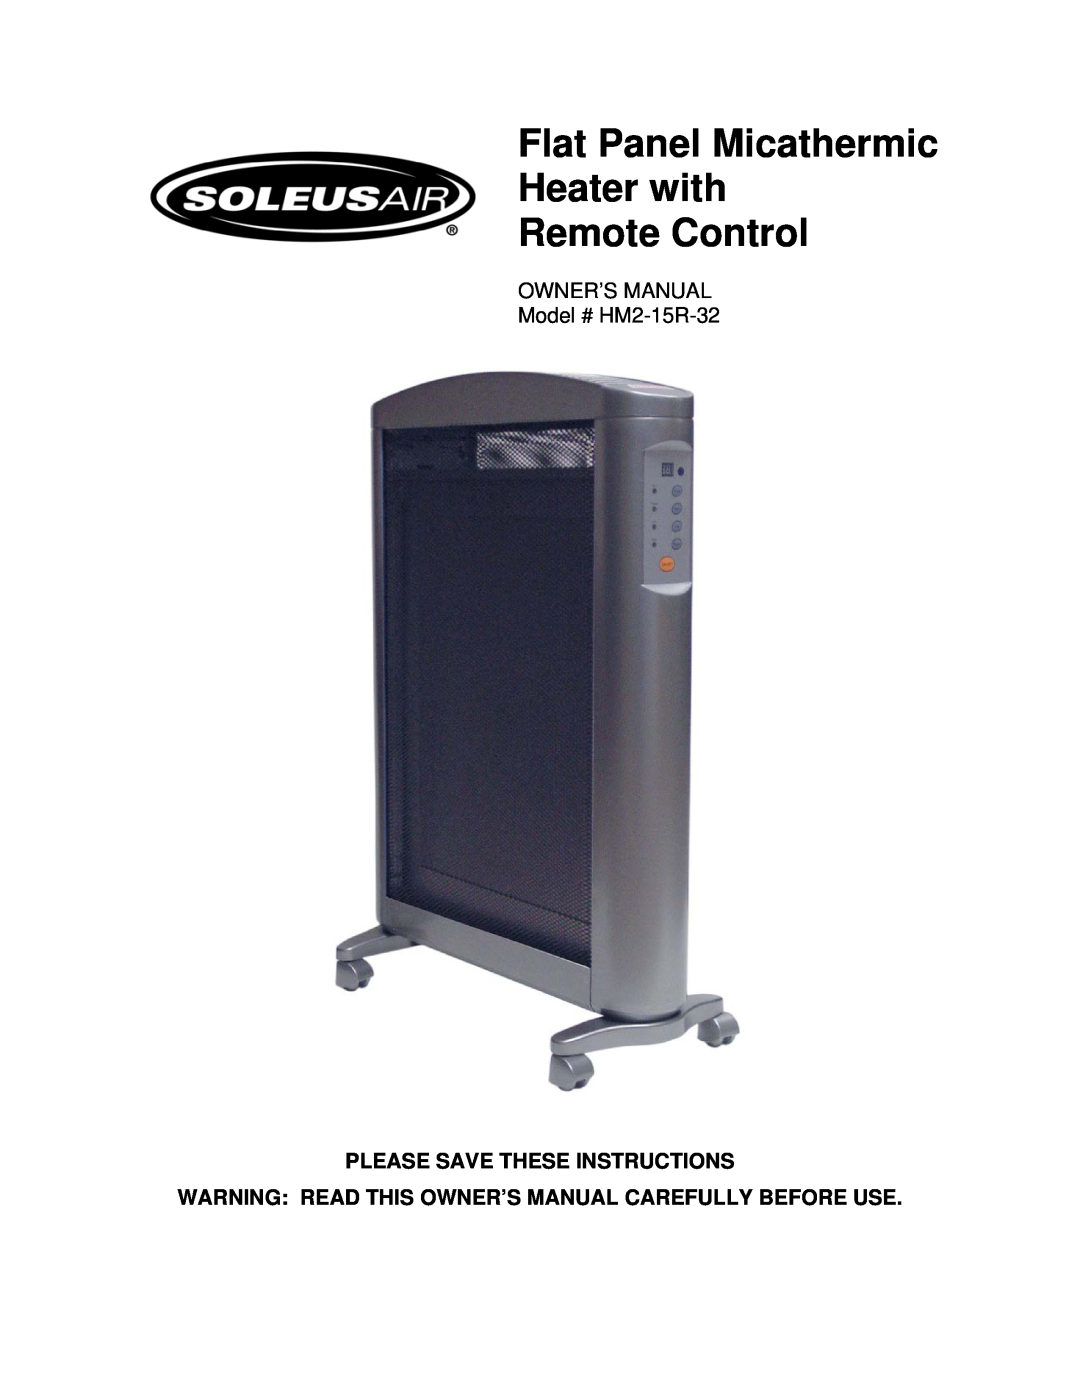 Soleus Air HM2-15R-32 owner manual Flat Panel Micathermic Heater with Remote Control, Please Save These Instructions 